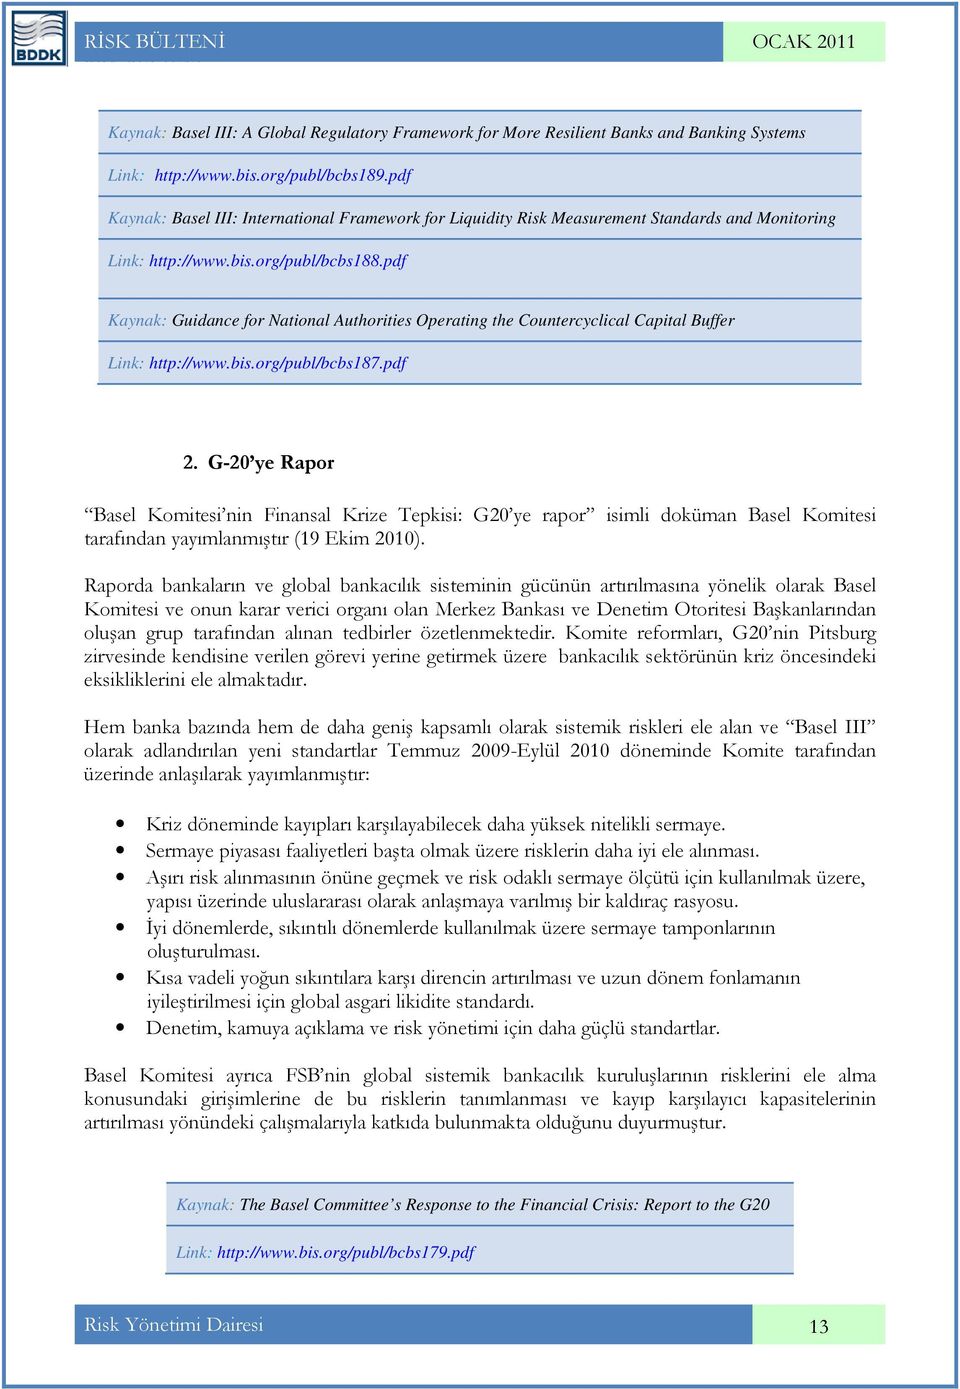 pdf Kaynak: Guidance for National Authorities Operating the Countercyclical Capital Buffer Link: http://www.bis.org/publ/bcbs187.pdf 2.